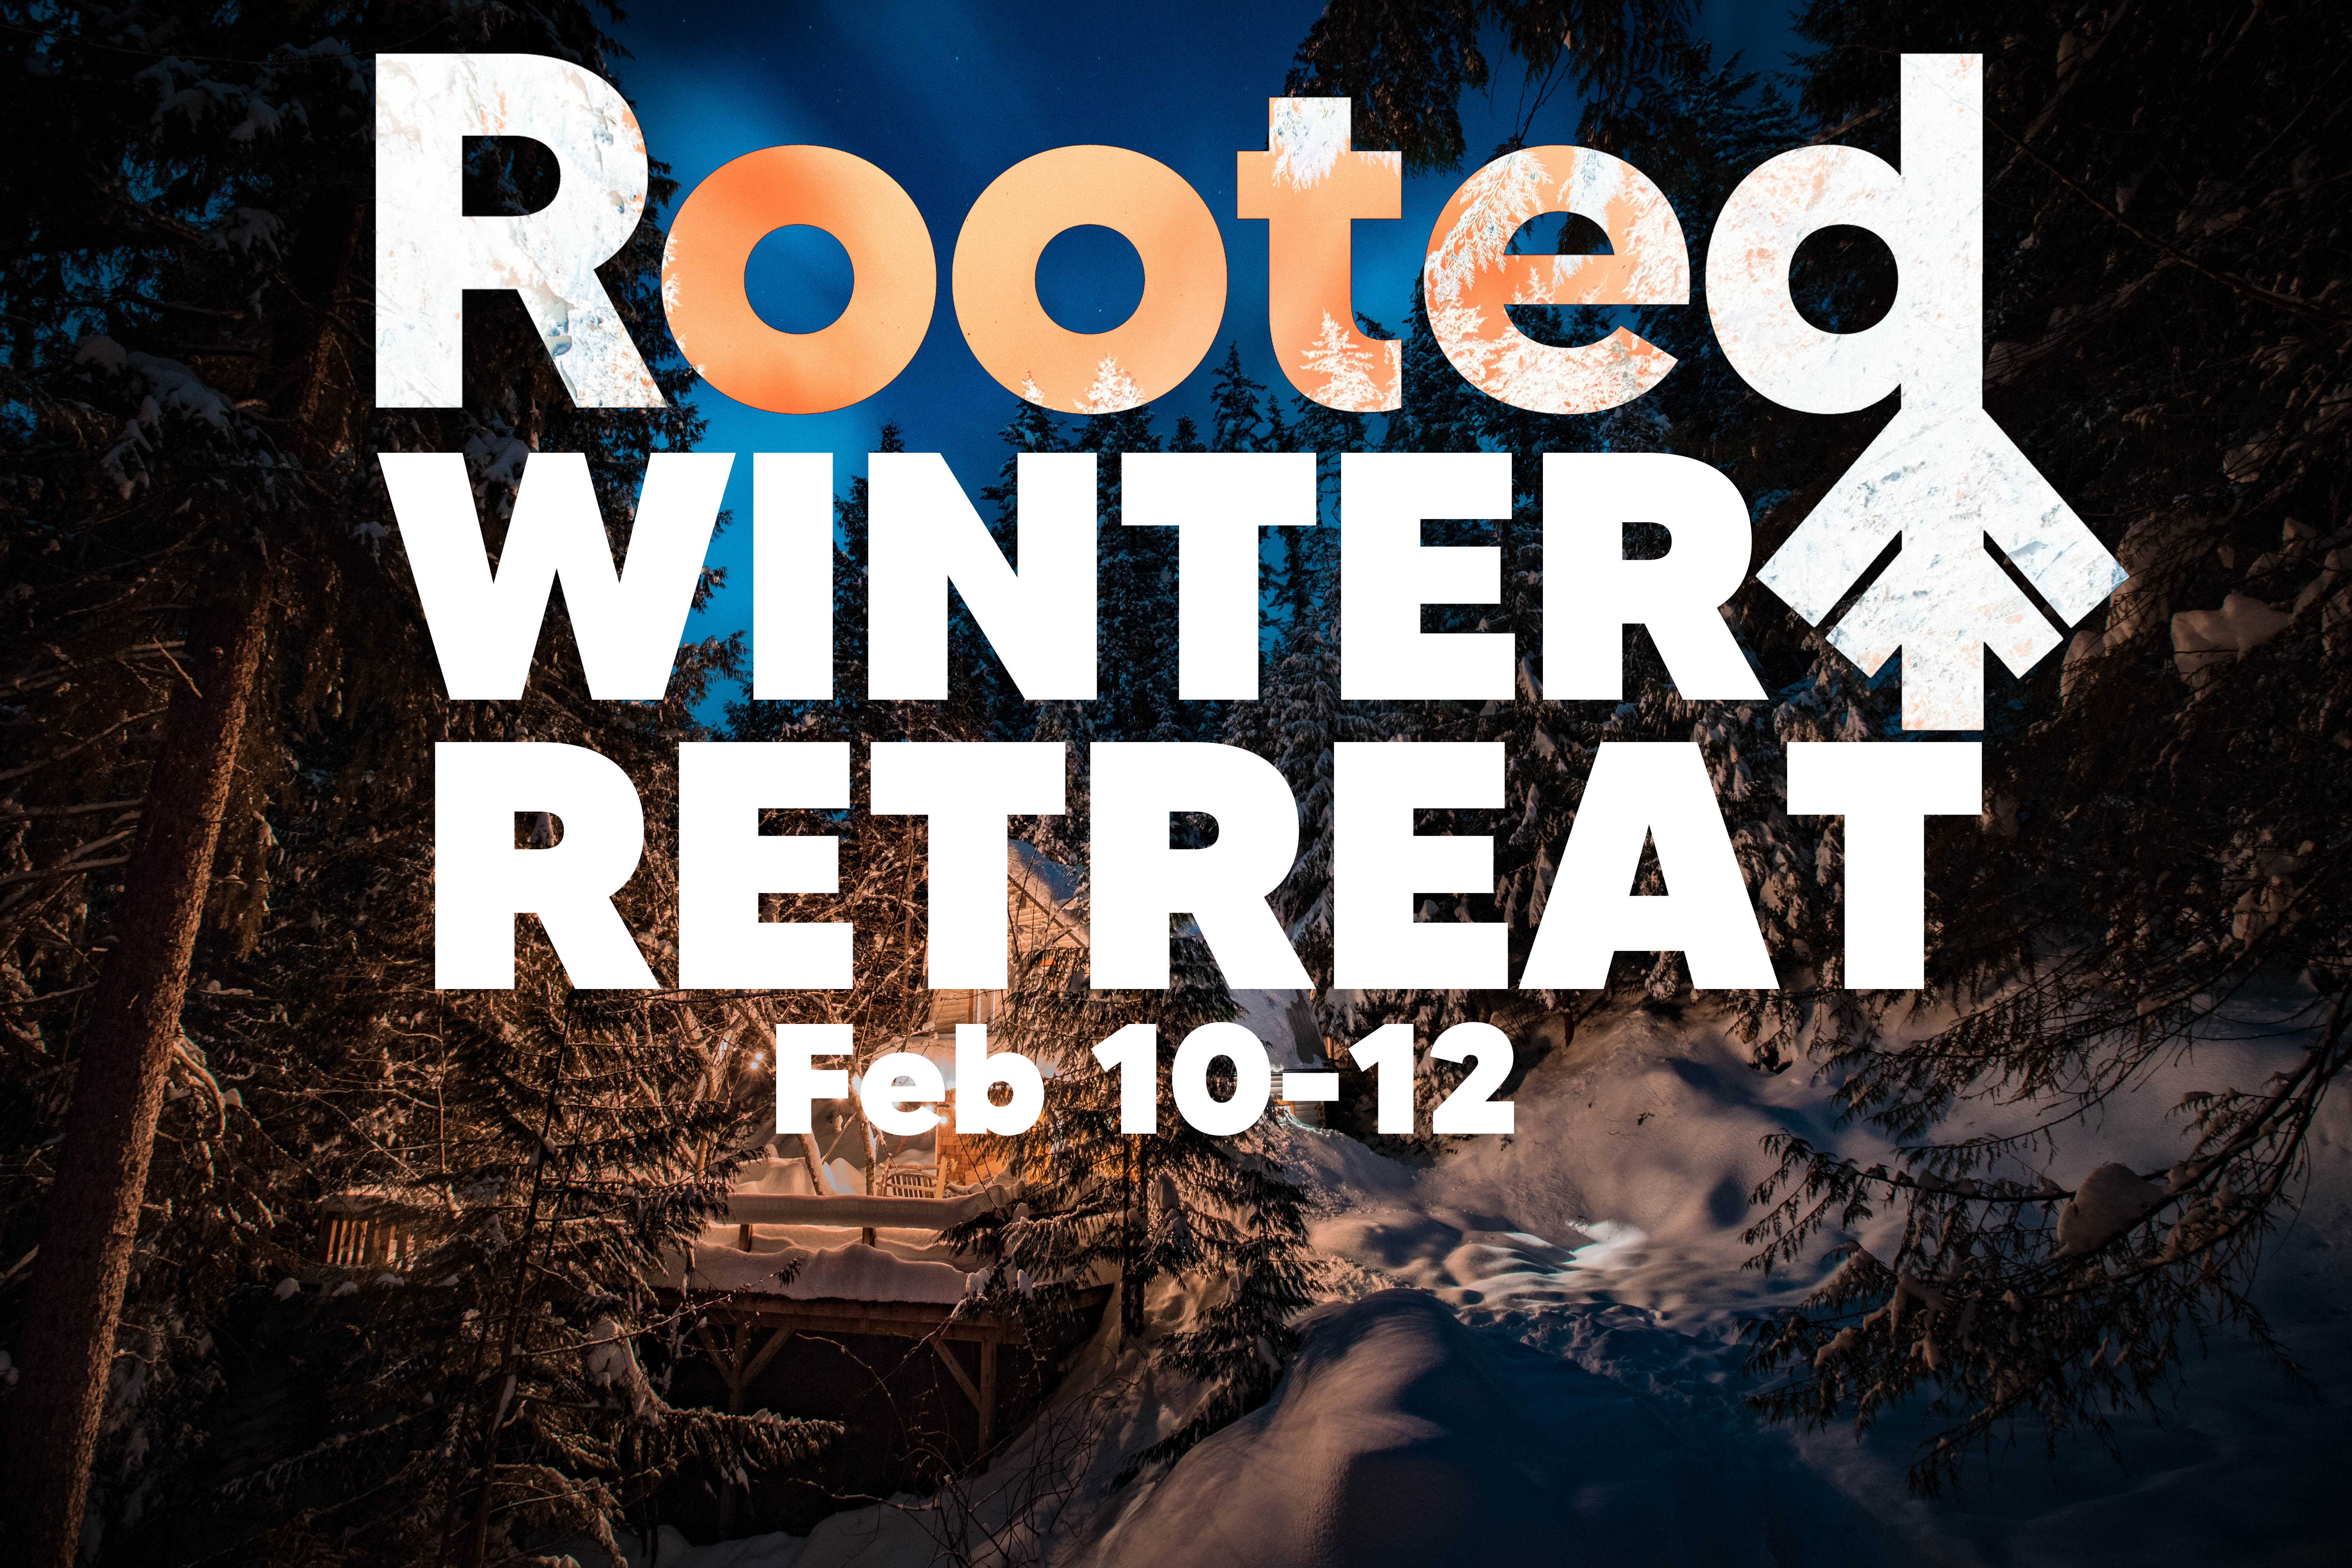 Feb 10-12: Rooted Winter Retreat